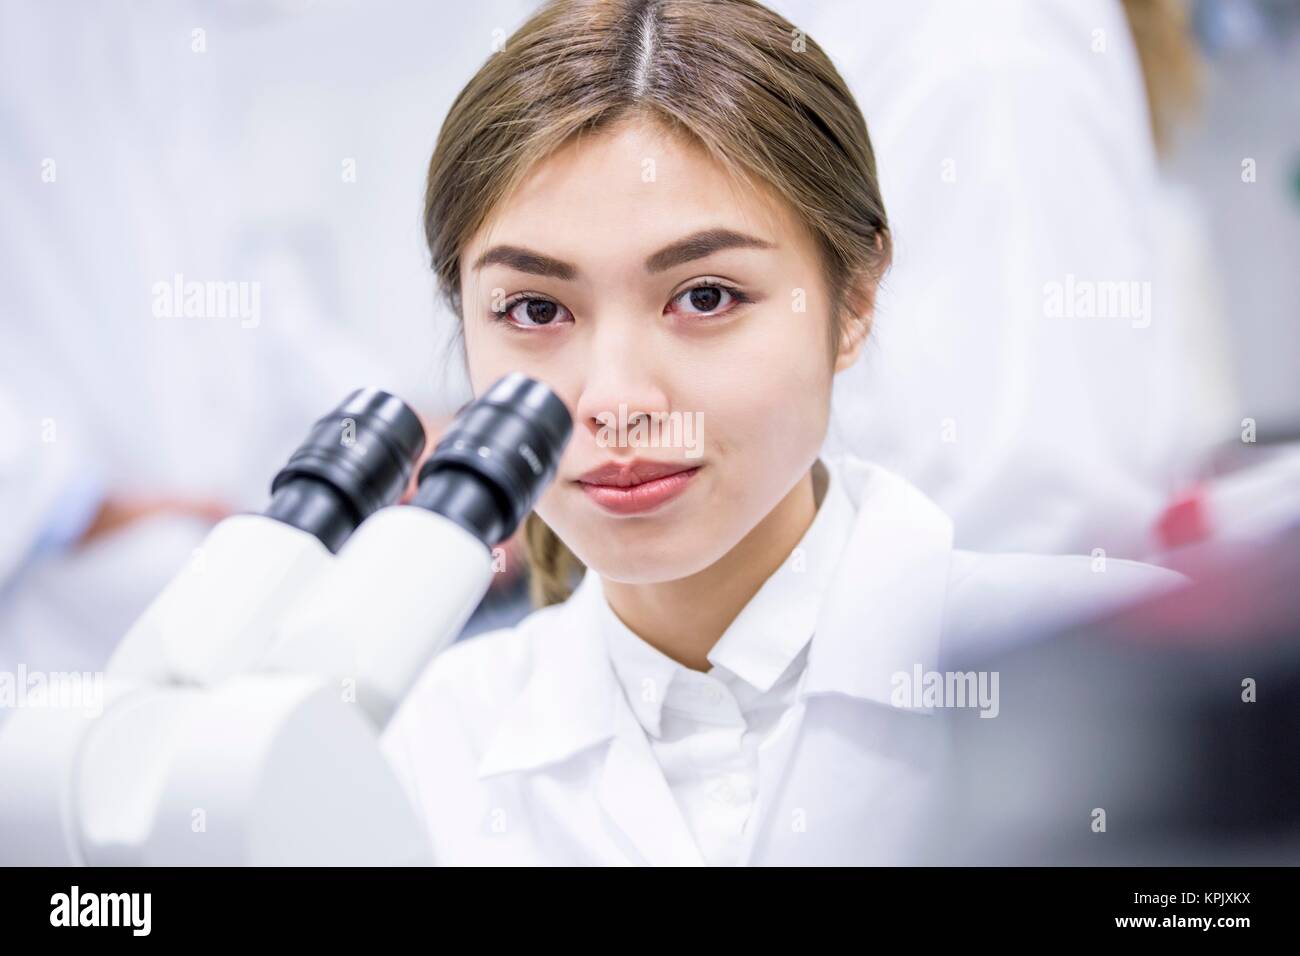 Female scientist using microscope, looking at camera. Stock Photo